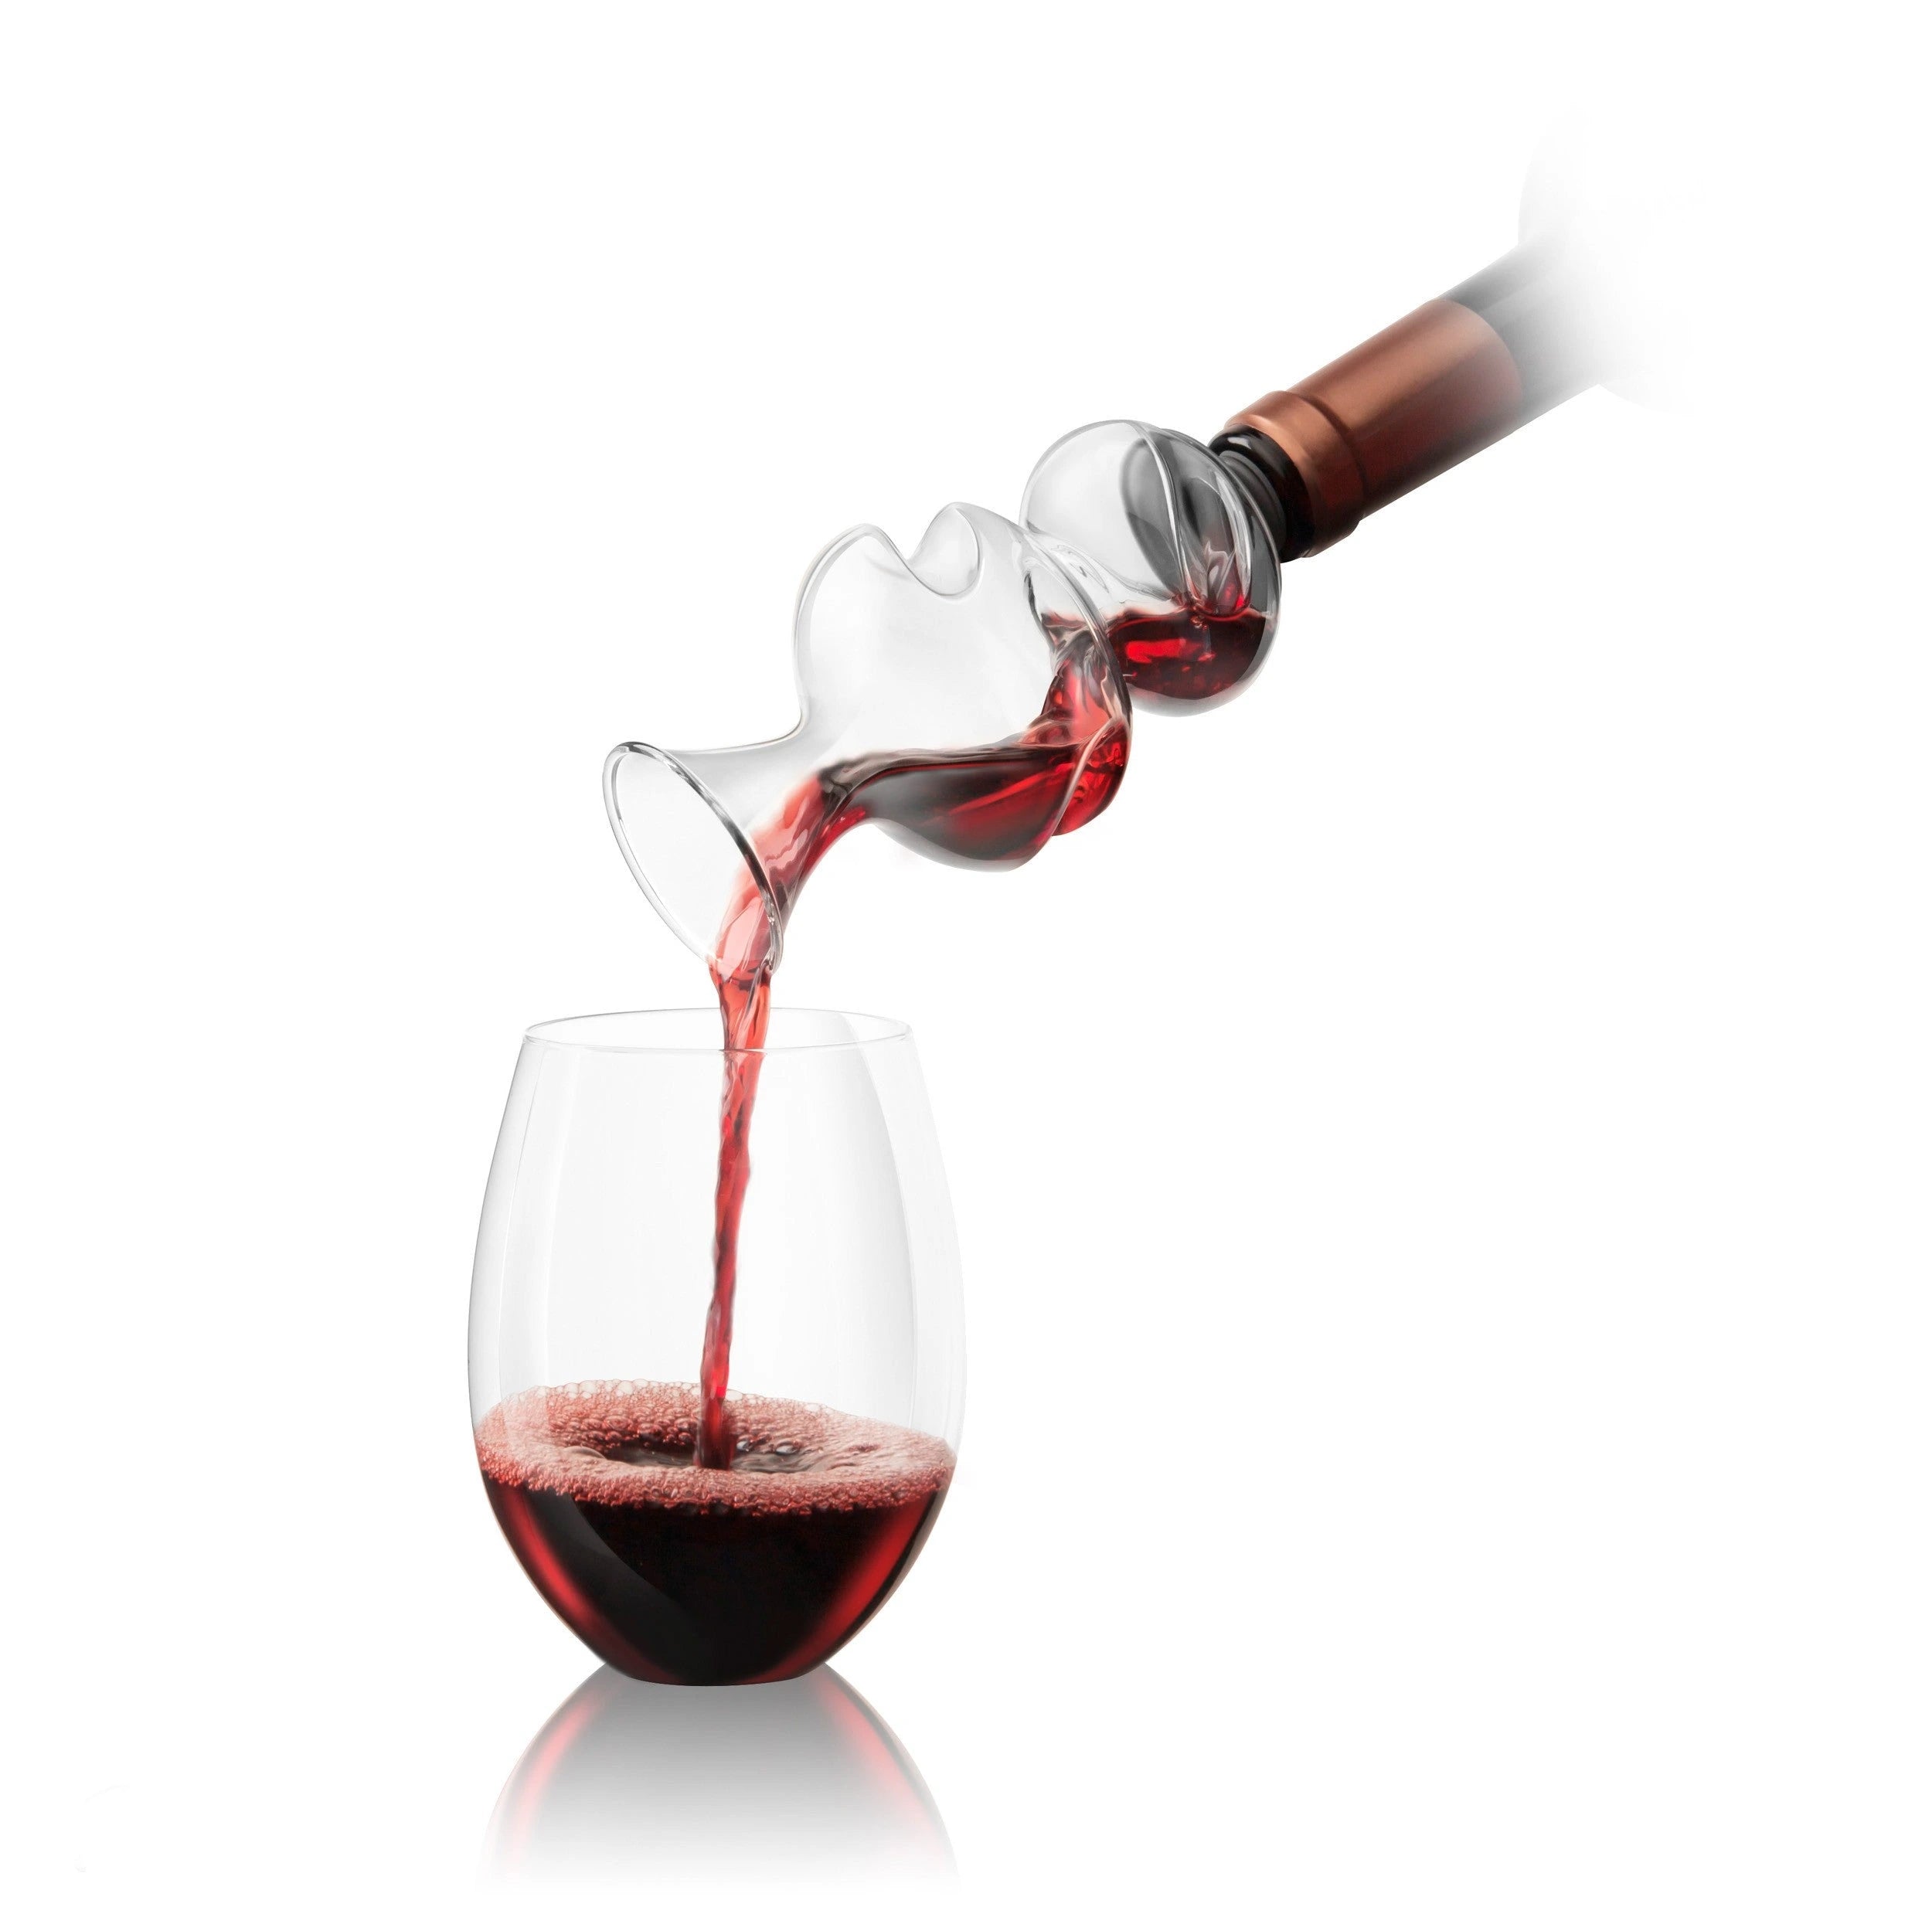 FINAL TOUCH WINE AERATOR WITH STAINLESS STEEL STAND